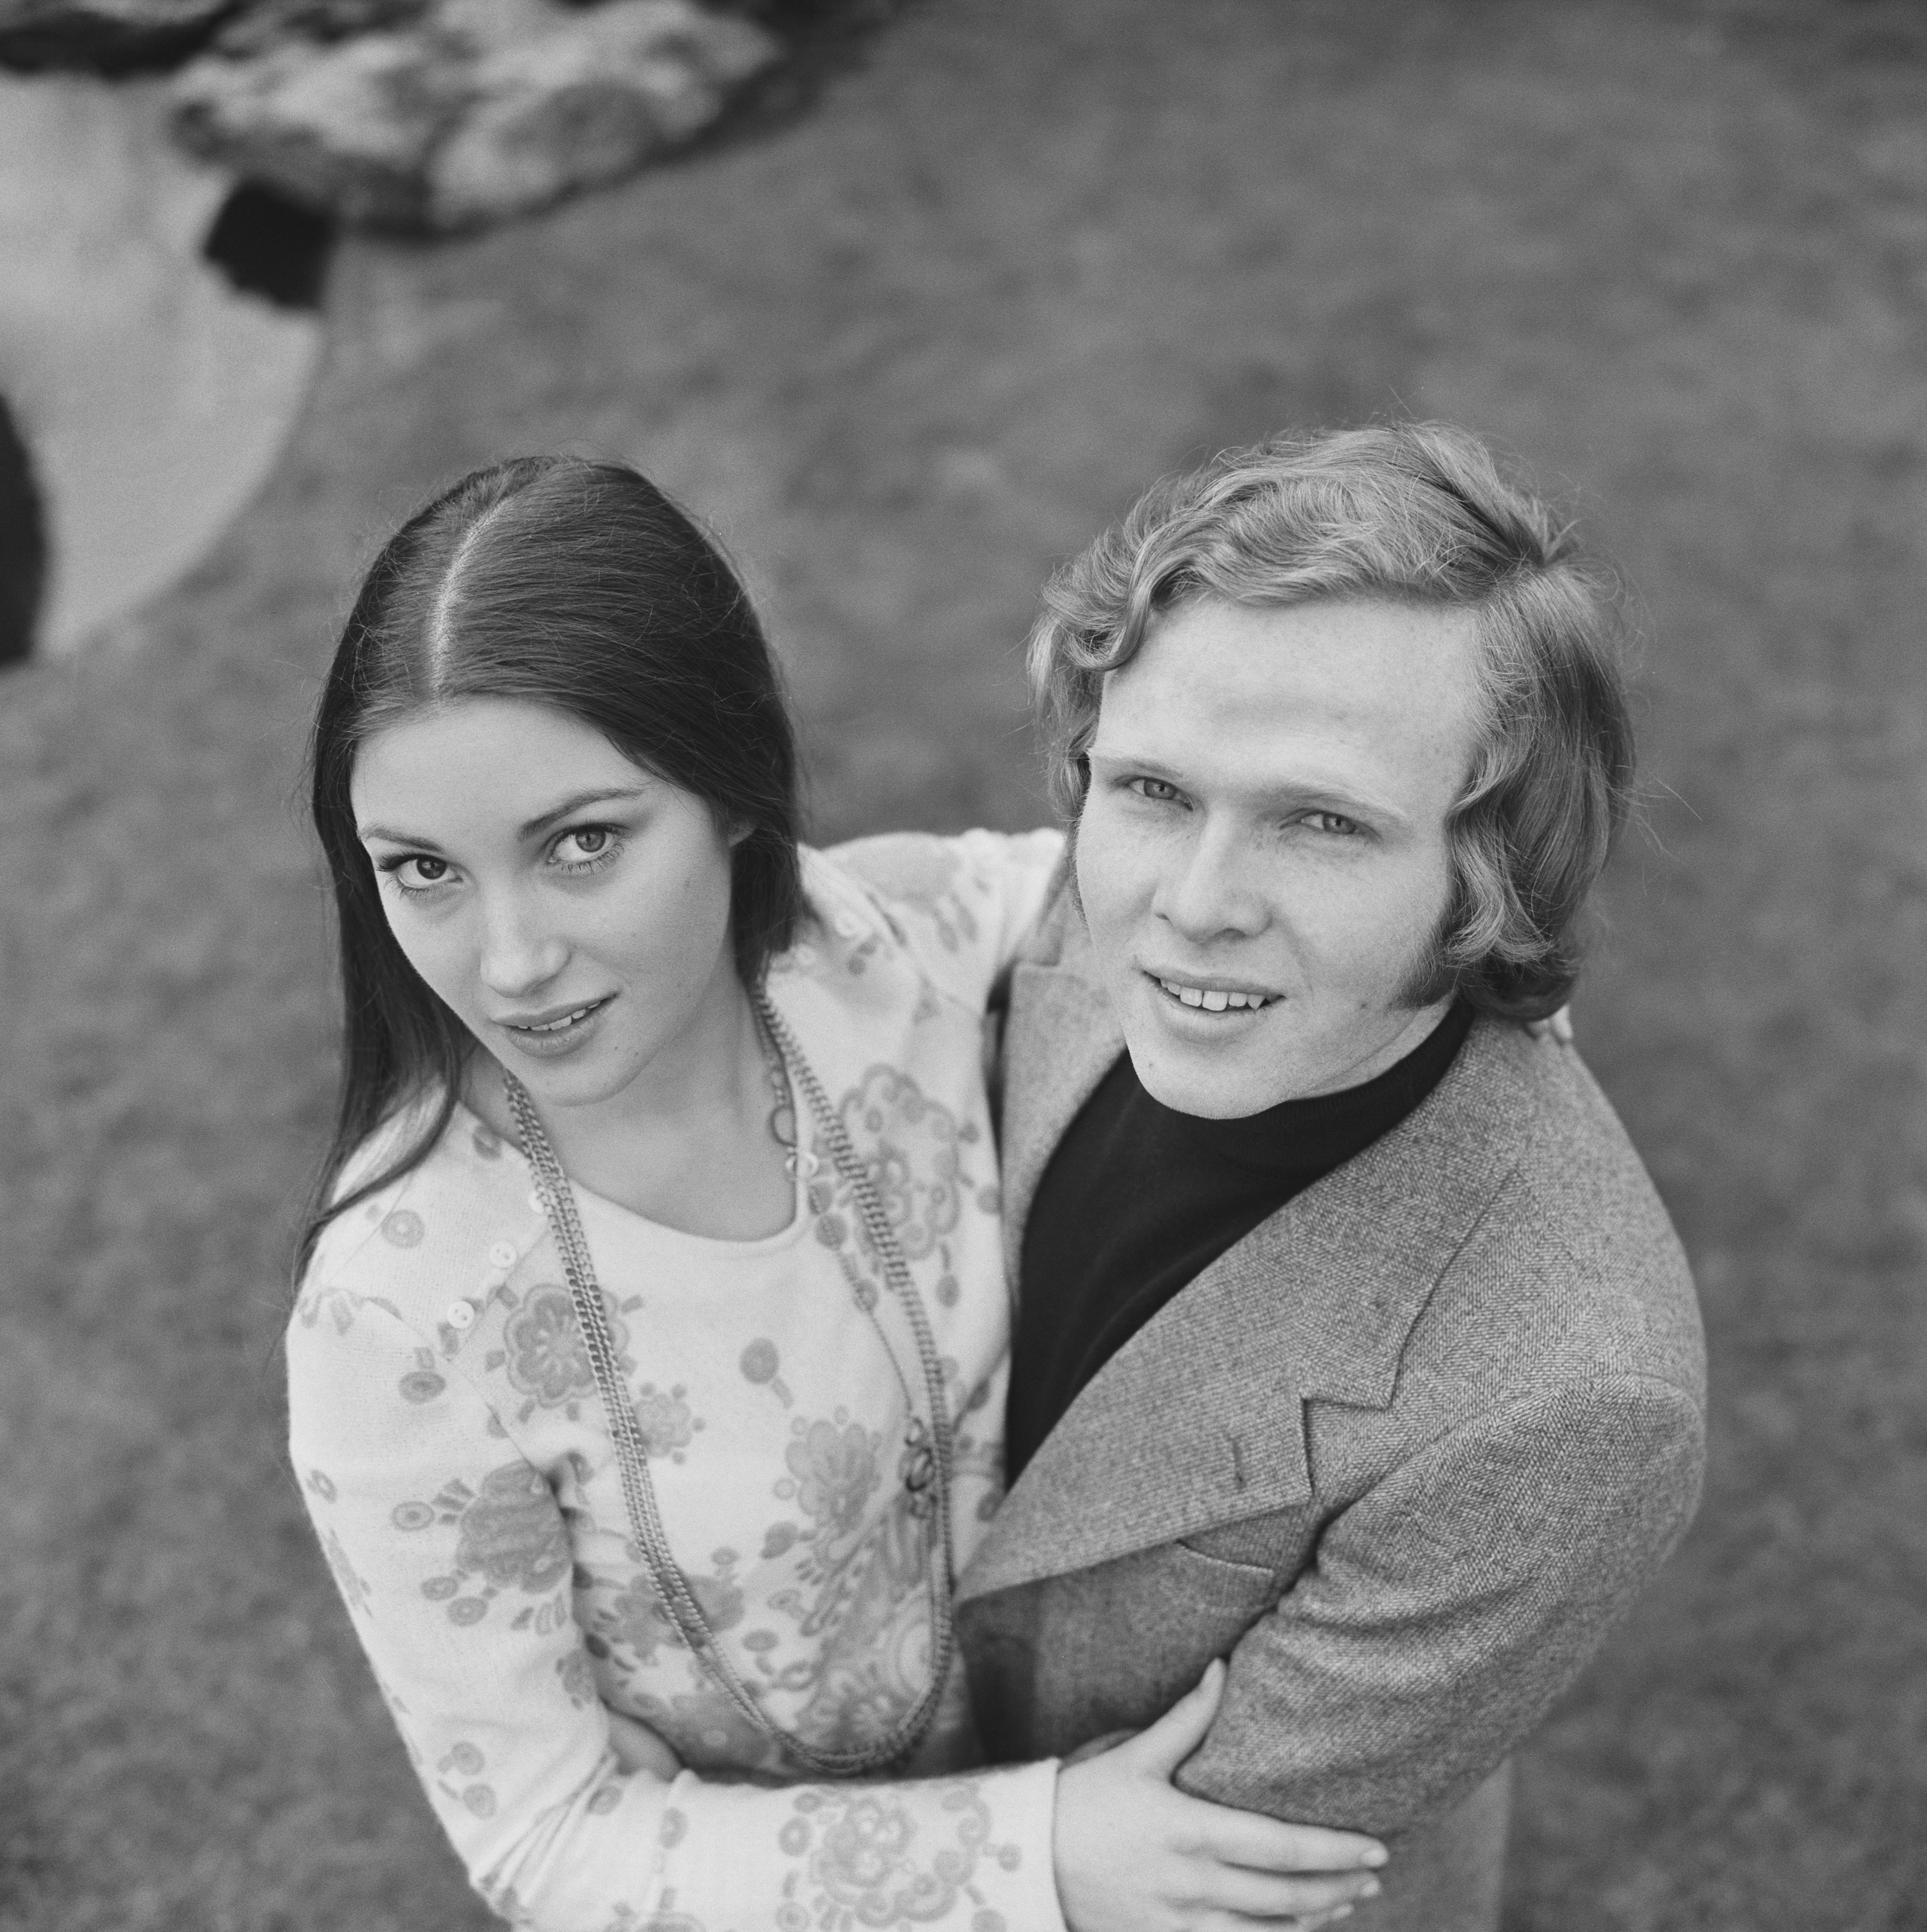 Jane Seymour and Michael Attenborough in the United Kingdom, March 31, 1970 | Source: Getty Images